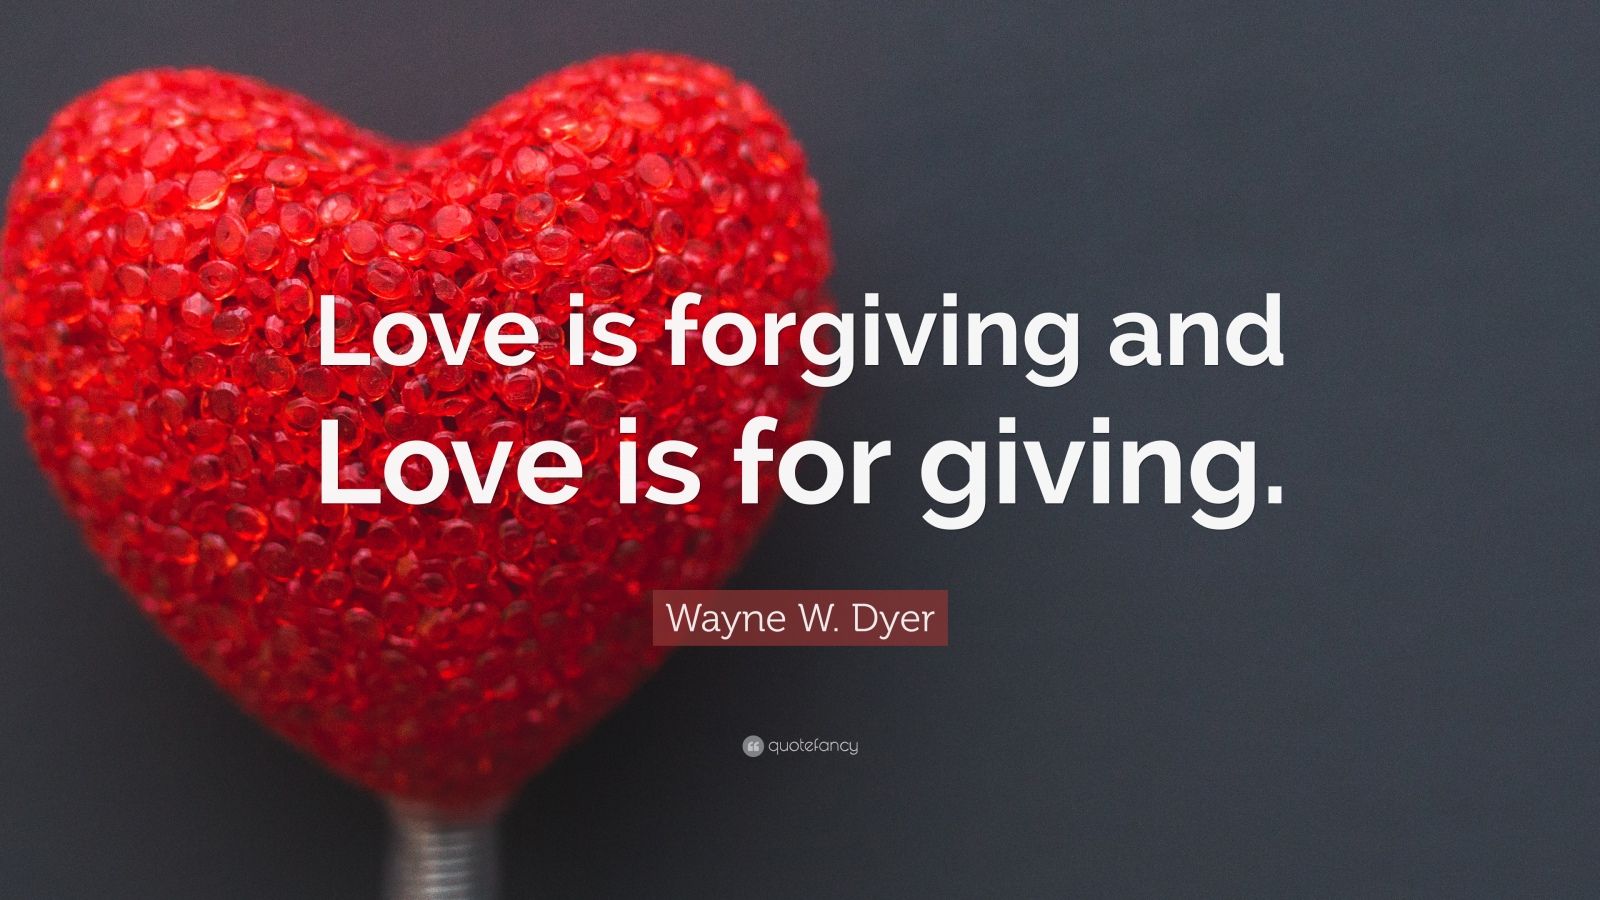 essay on love is giving and forgiving in english